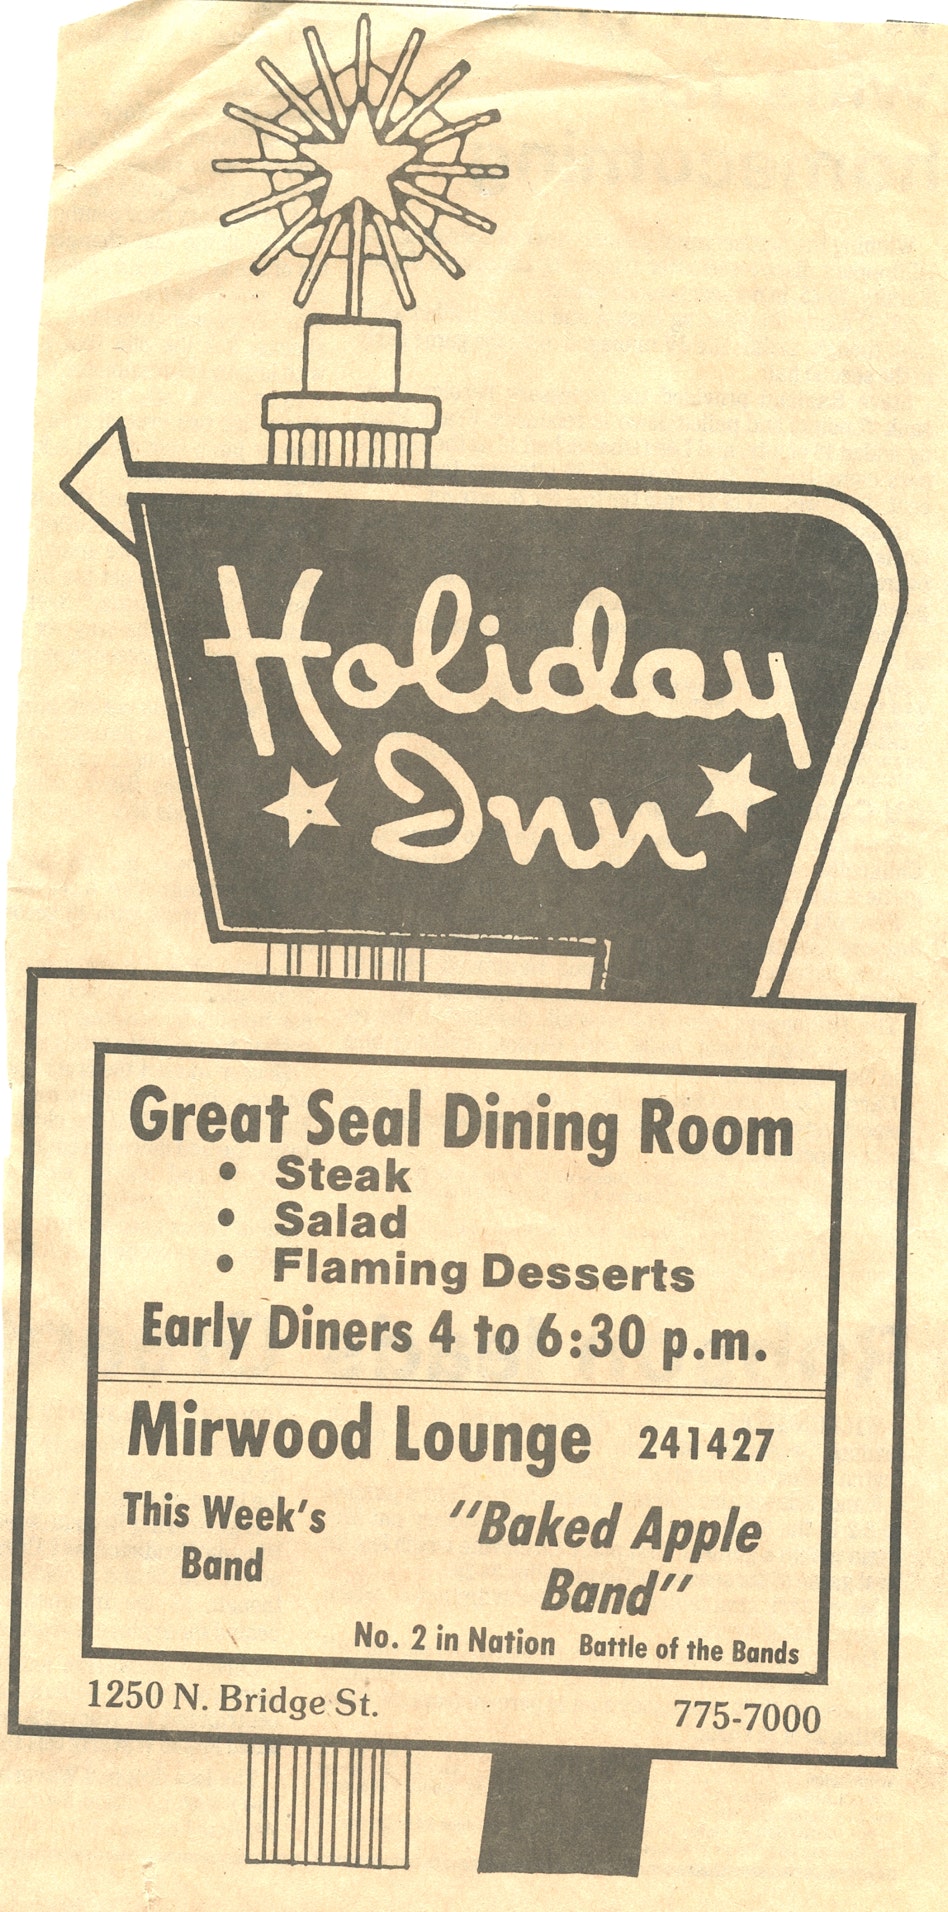 Newspaper advertisement for Baked Apple Band performing at the Holiday Inn for two weeks straight in Chillicothe, Ohio, 1983.